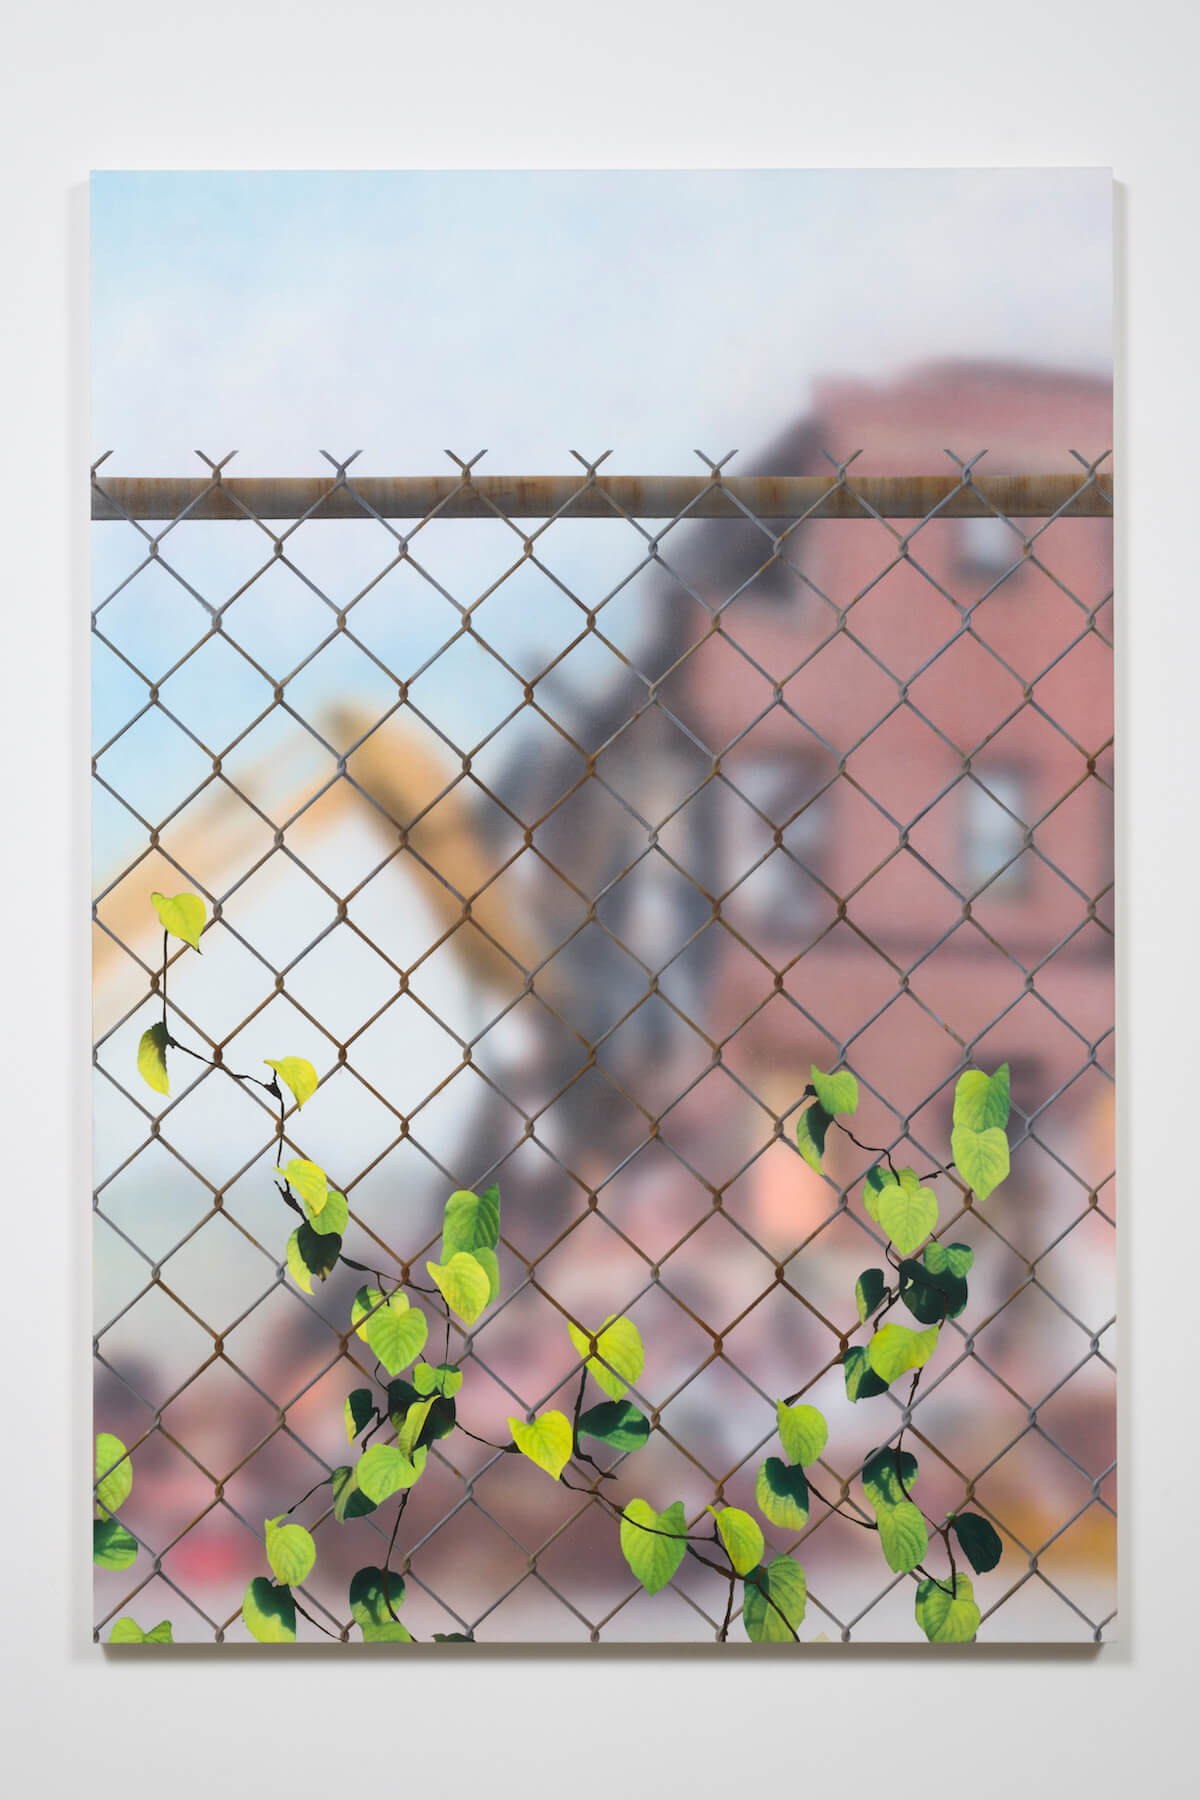 Gomez, Building in Deconstruction with Chain Link, 2017 (SG 17.027) A